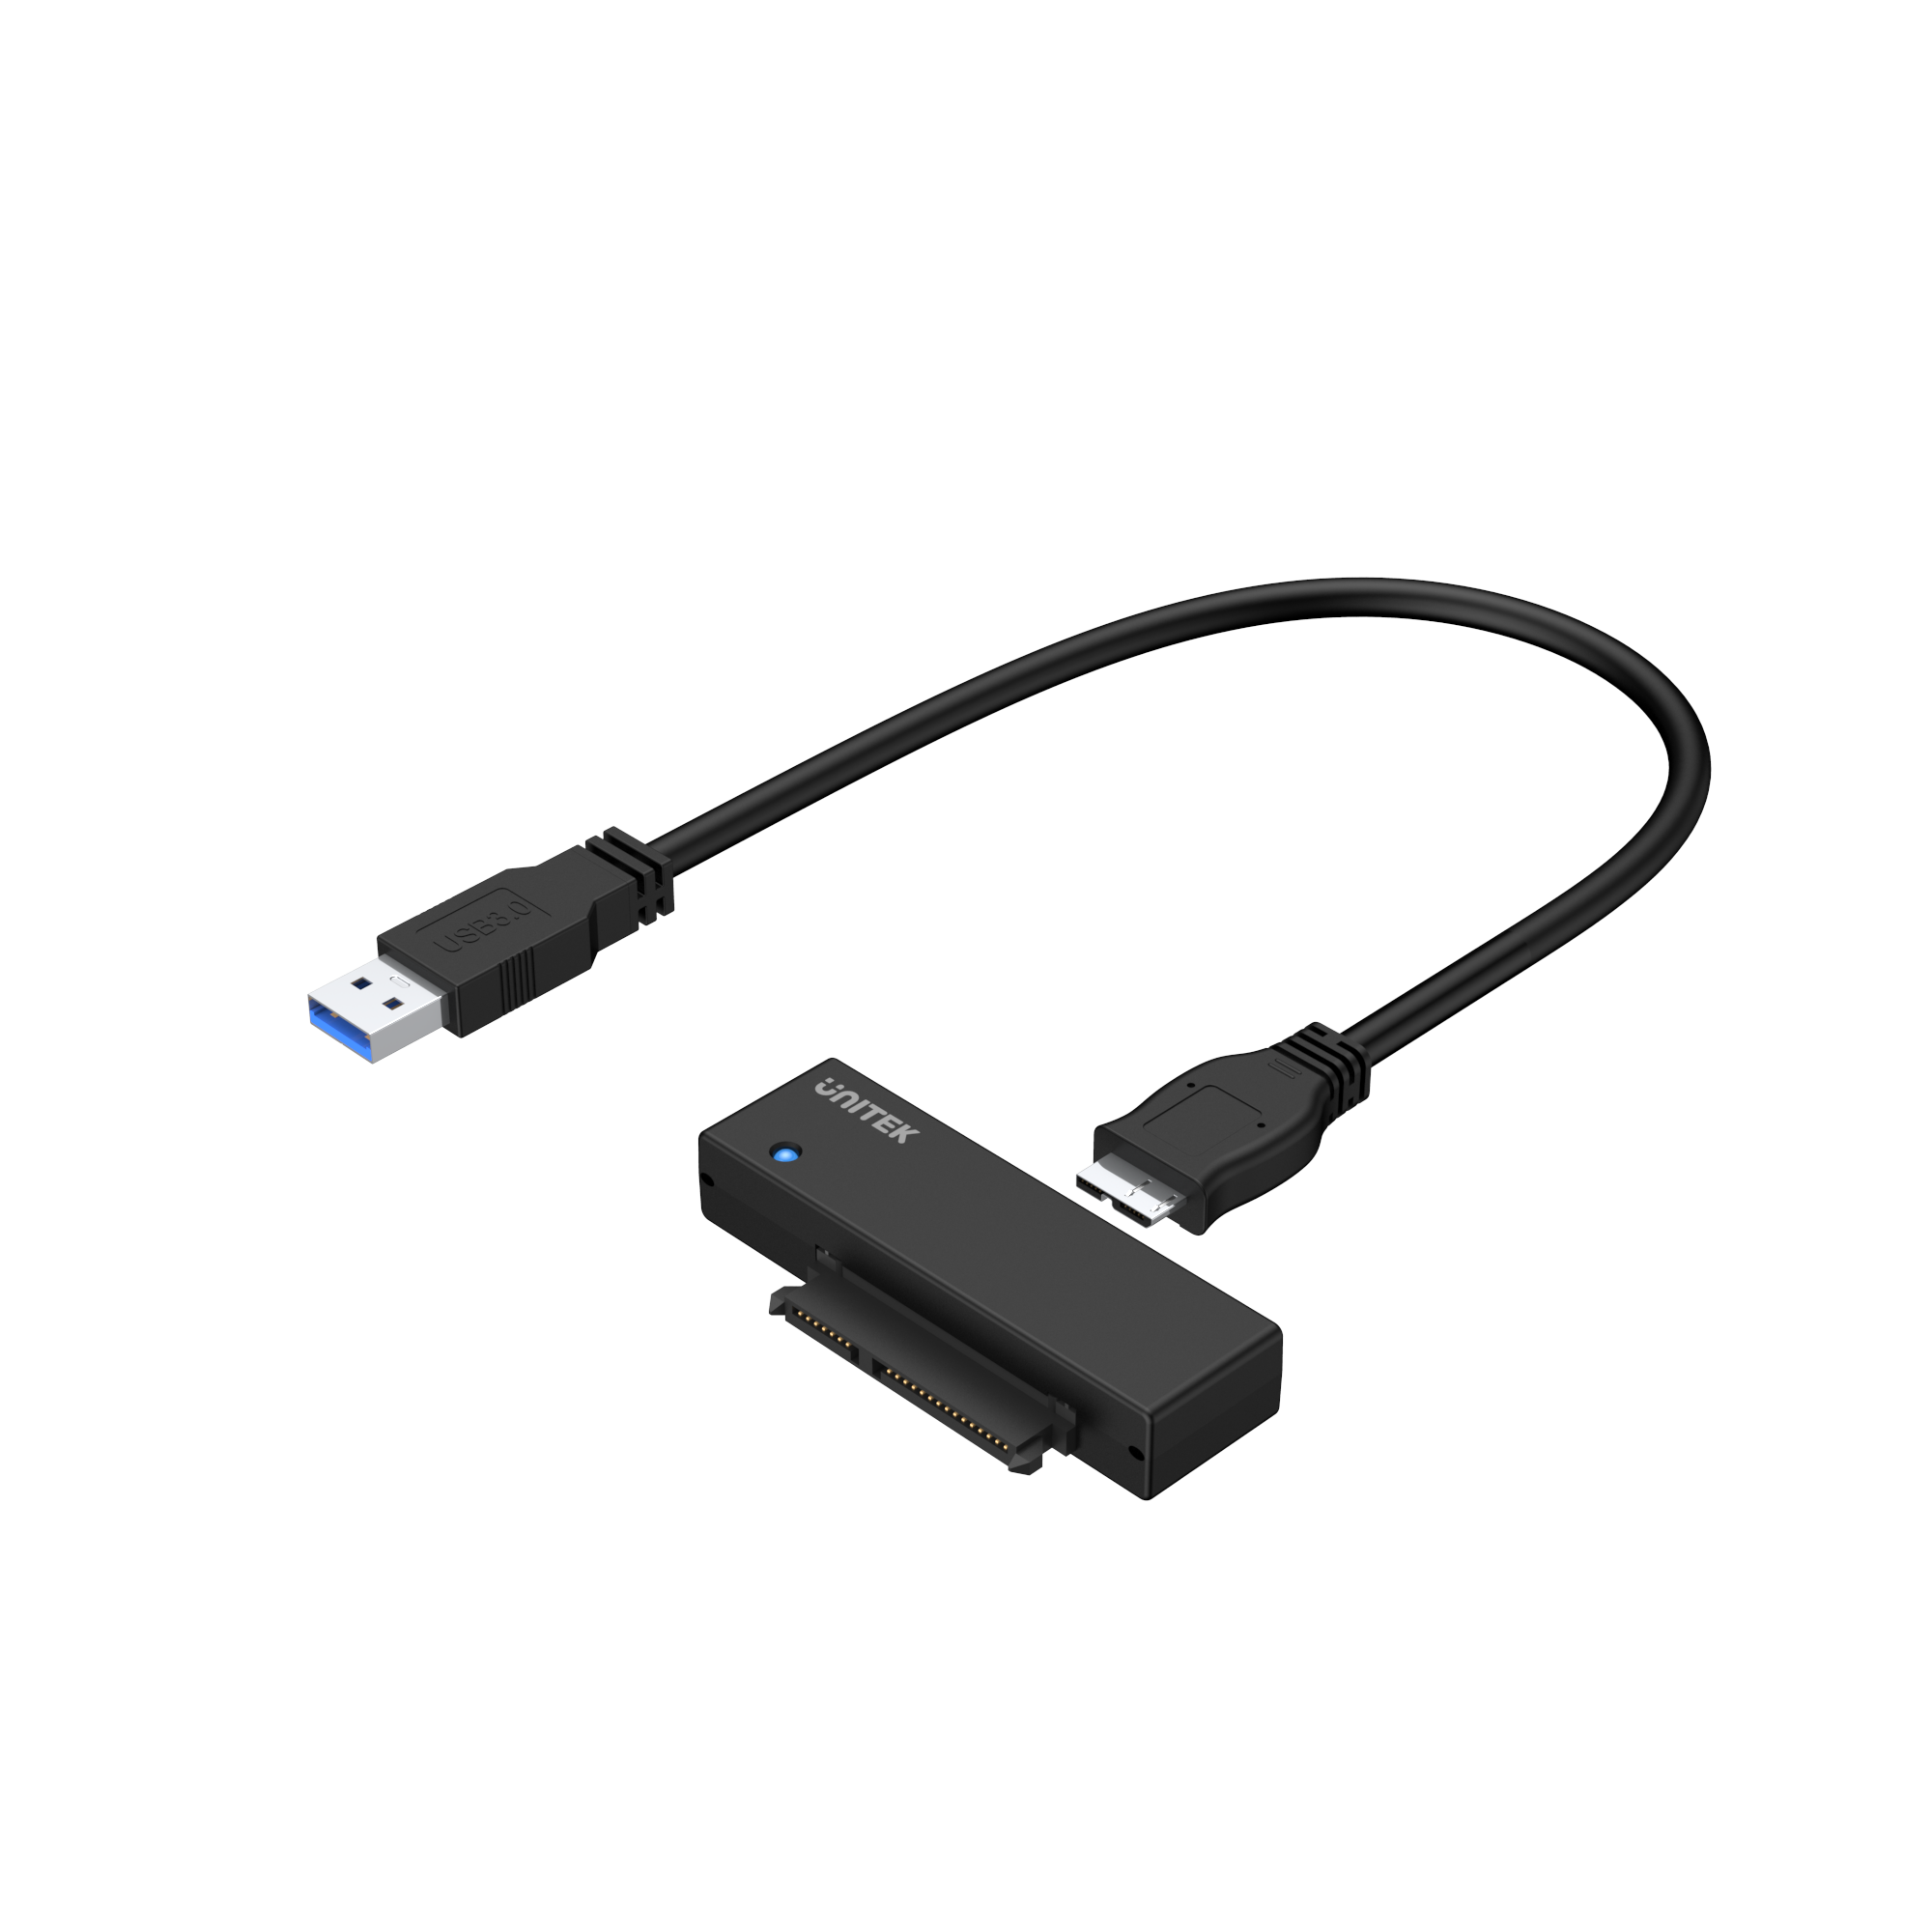 USB 3.0 to SATA III Adapter (With Power Adapter)